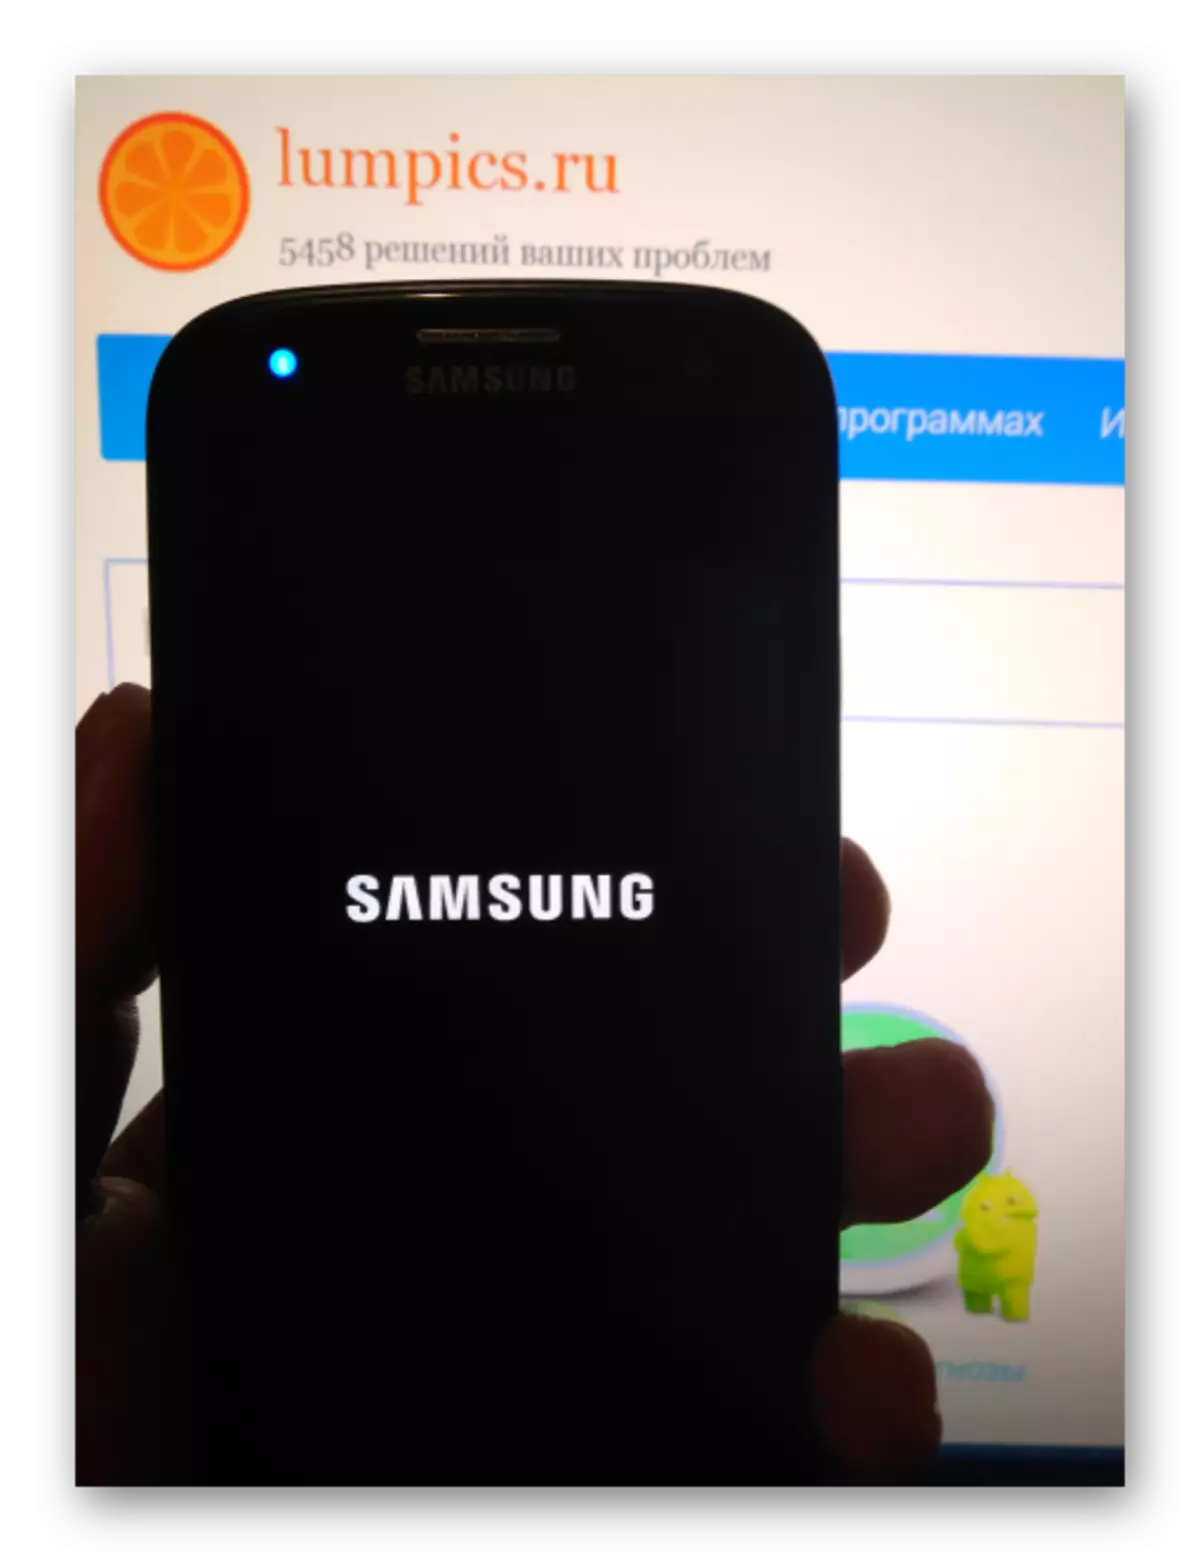 Samsung Galaxy S3 GT-i9300 launch Android after firmware via Mobile Odin